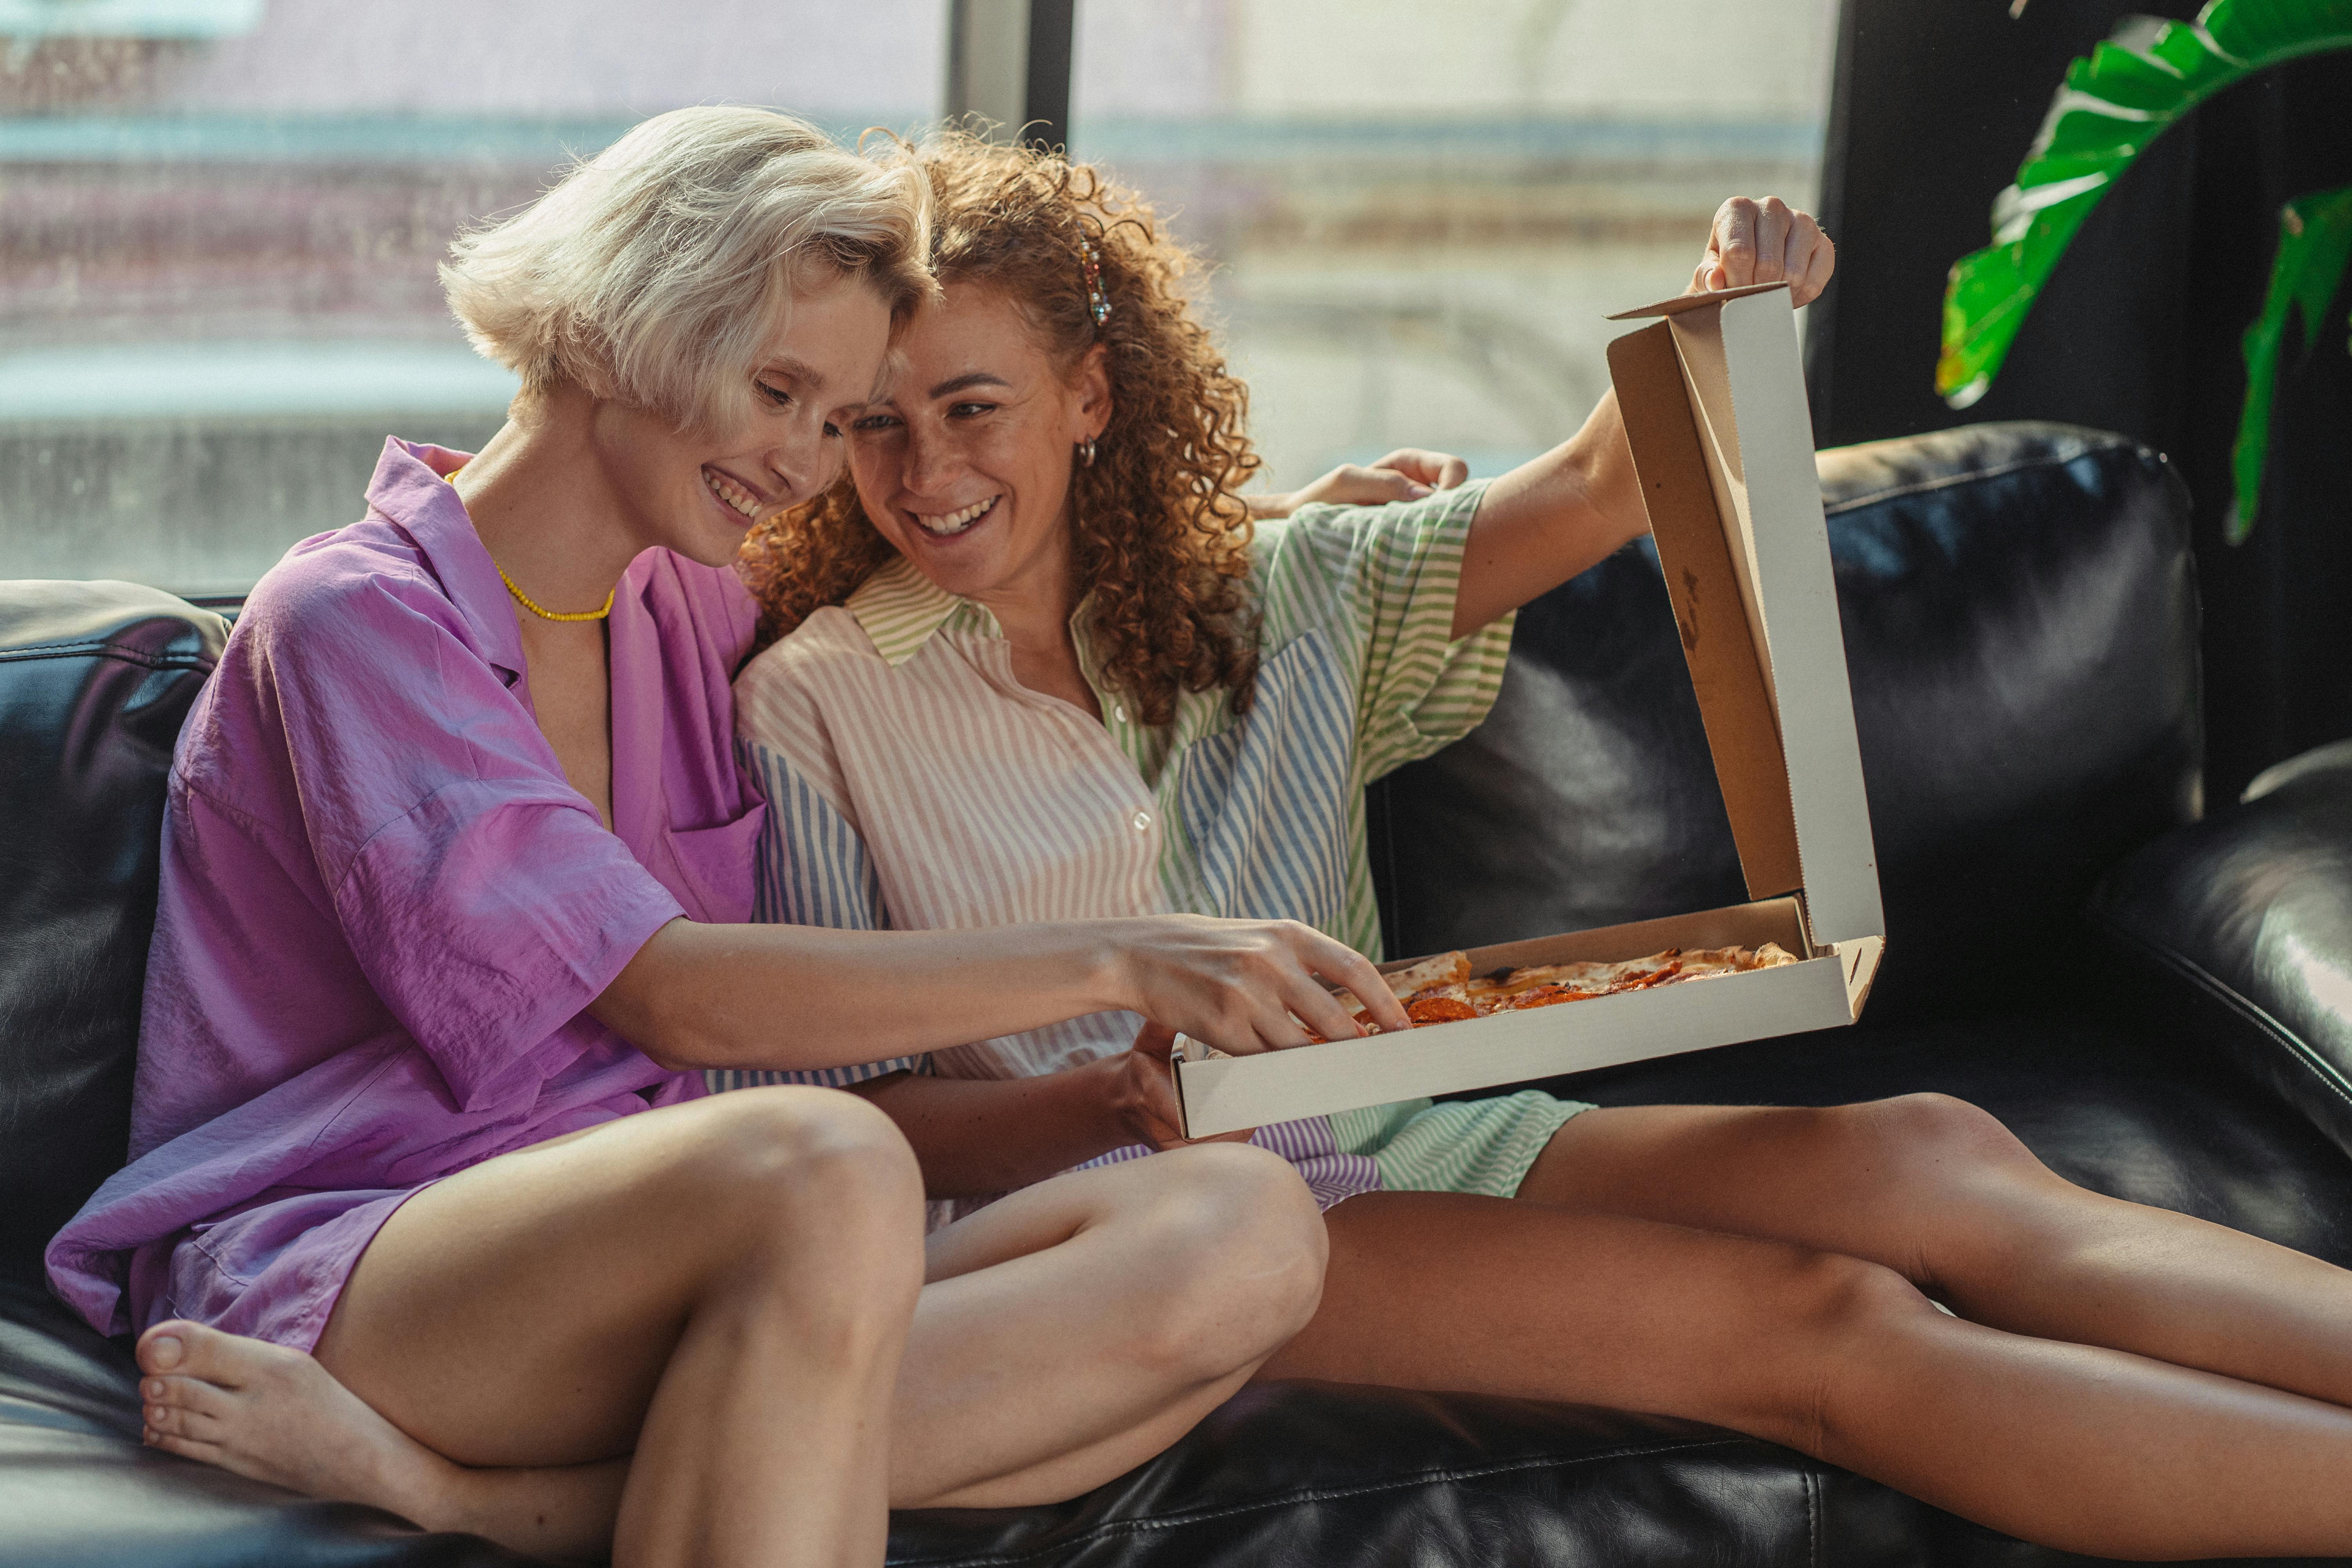 women sharing a box of pizza on a couch